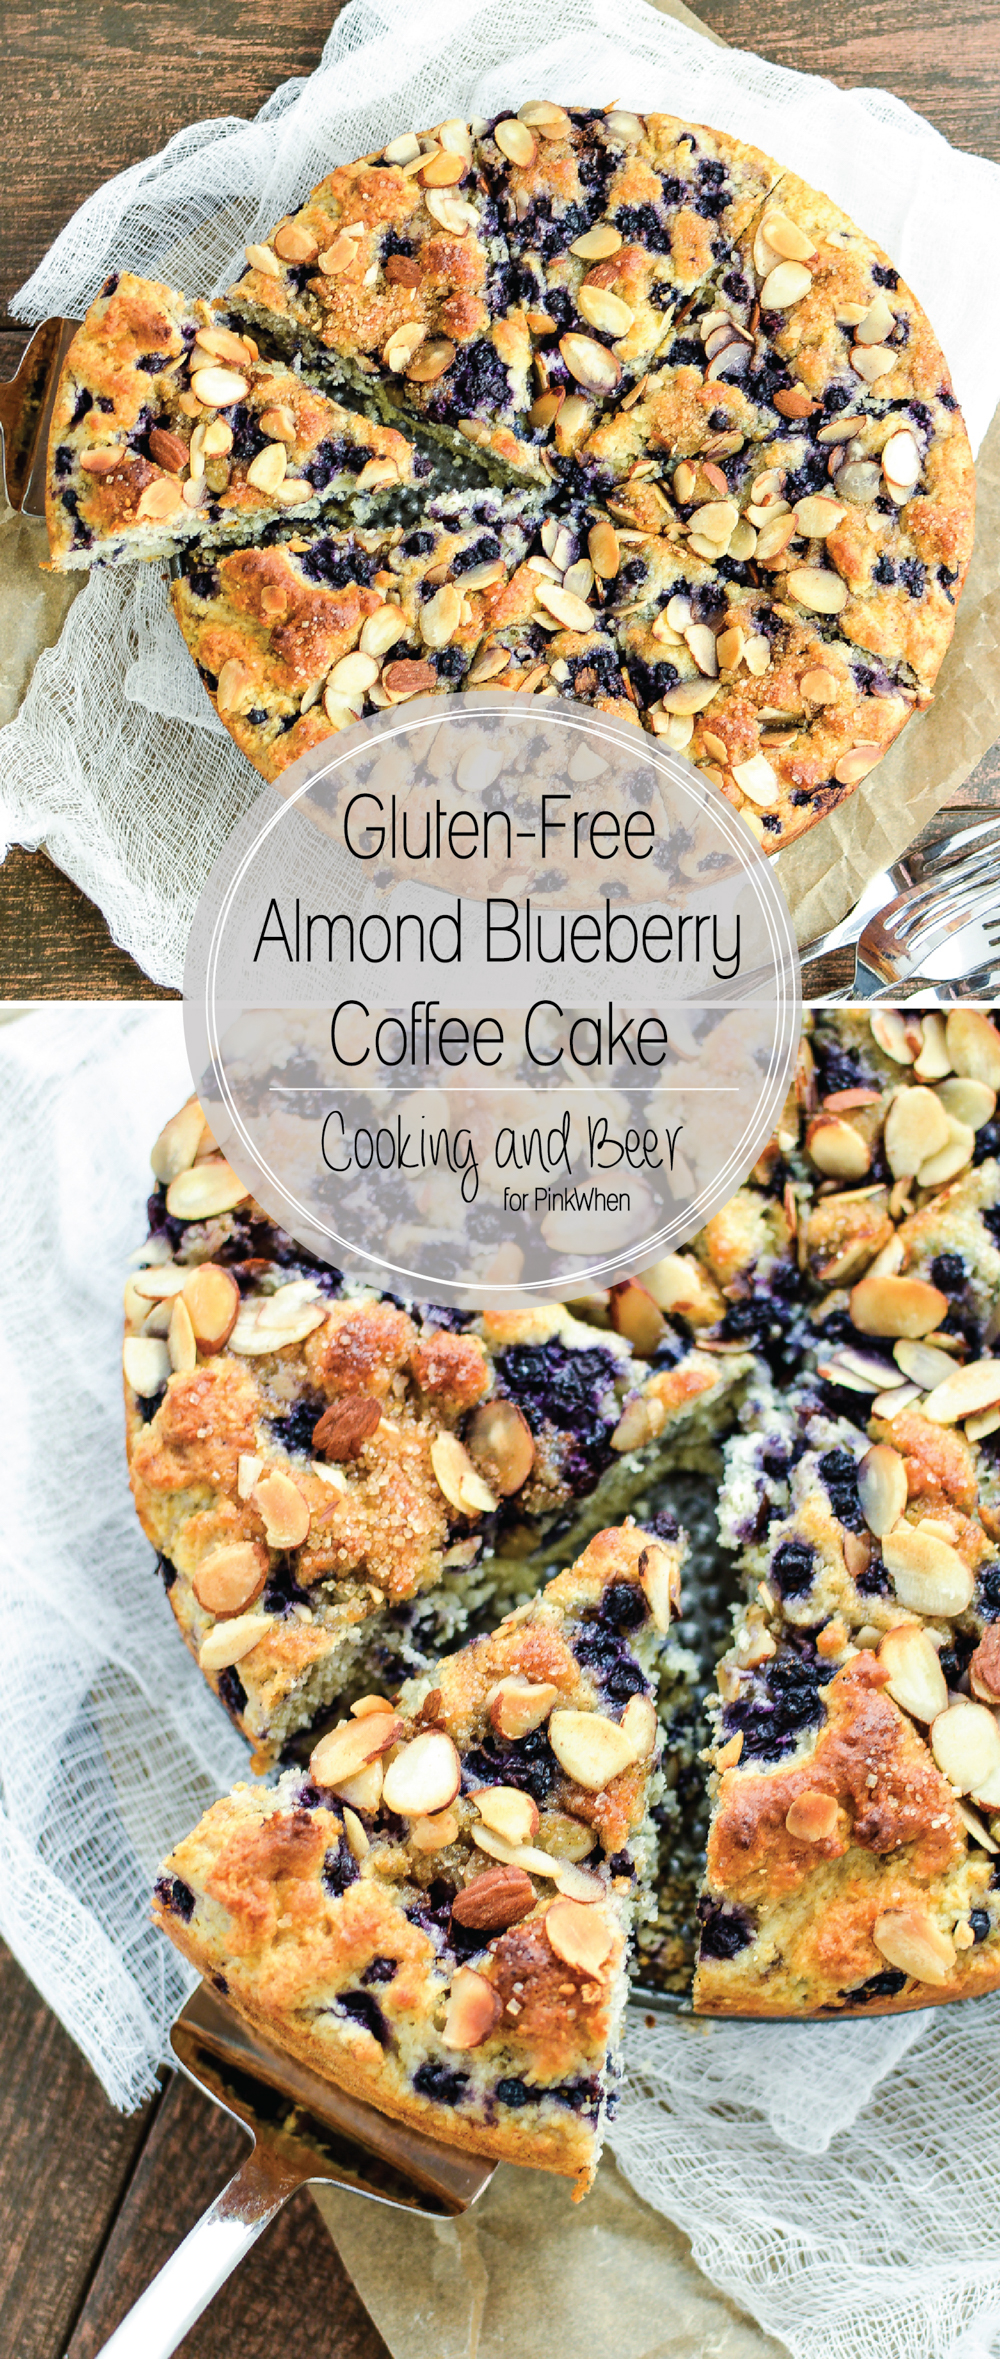 Gluten Free Almond Blueberry Coffee Cake is the perfect breakfast treat to serve with your morning cup of coffee!